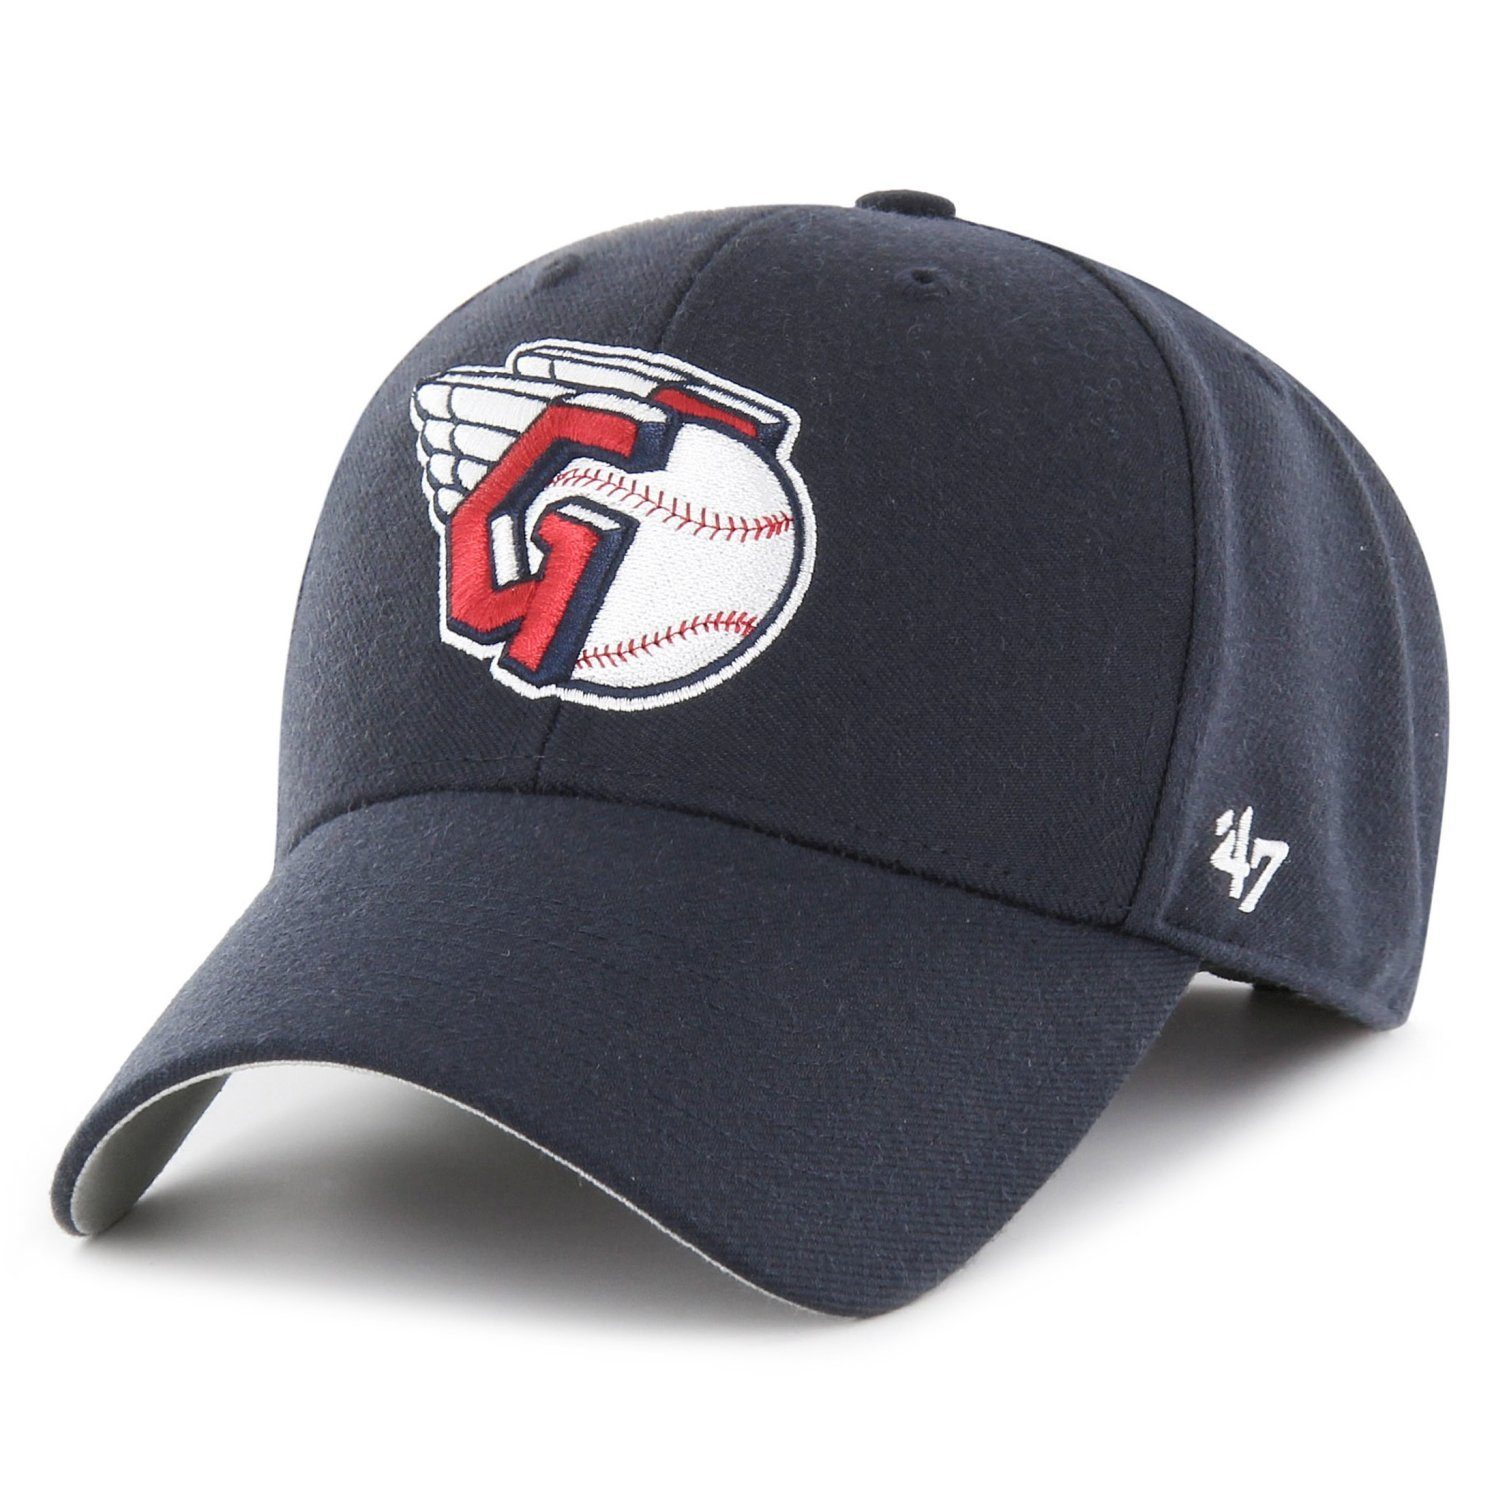 '47 Brand Trucker Cap Relaxed Fit MLB Cleveland Guardians